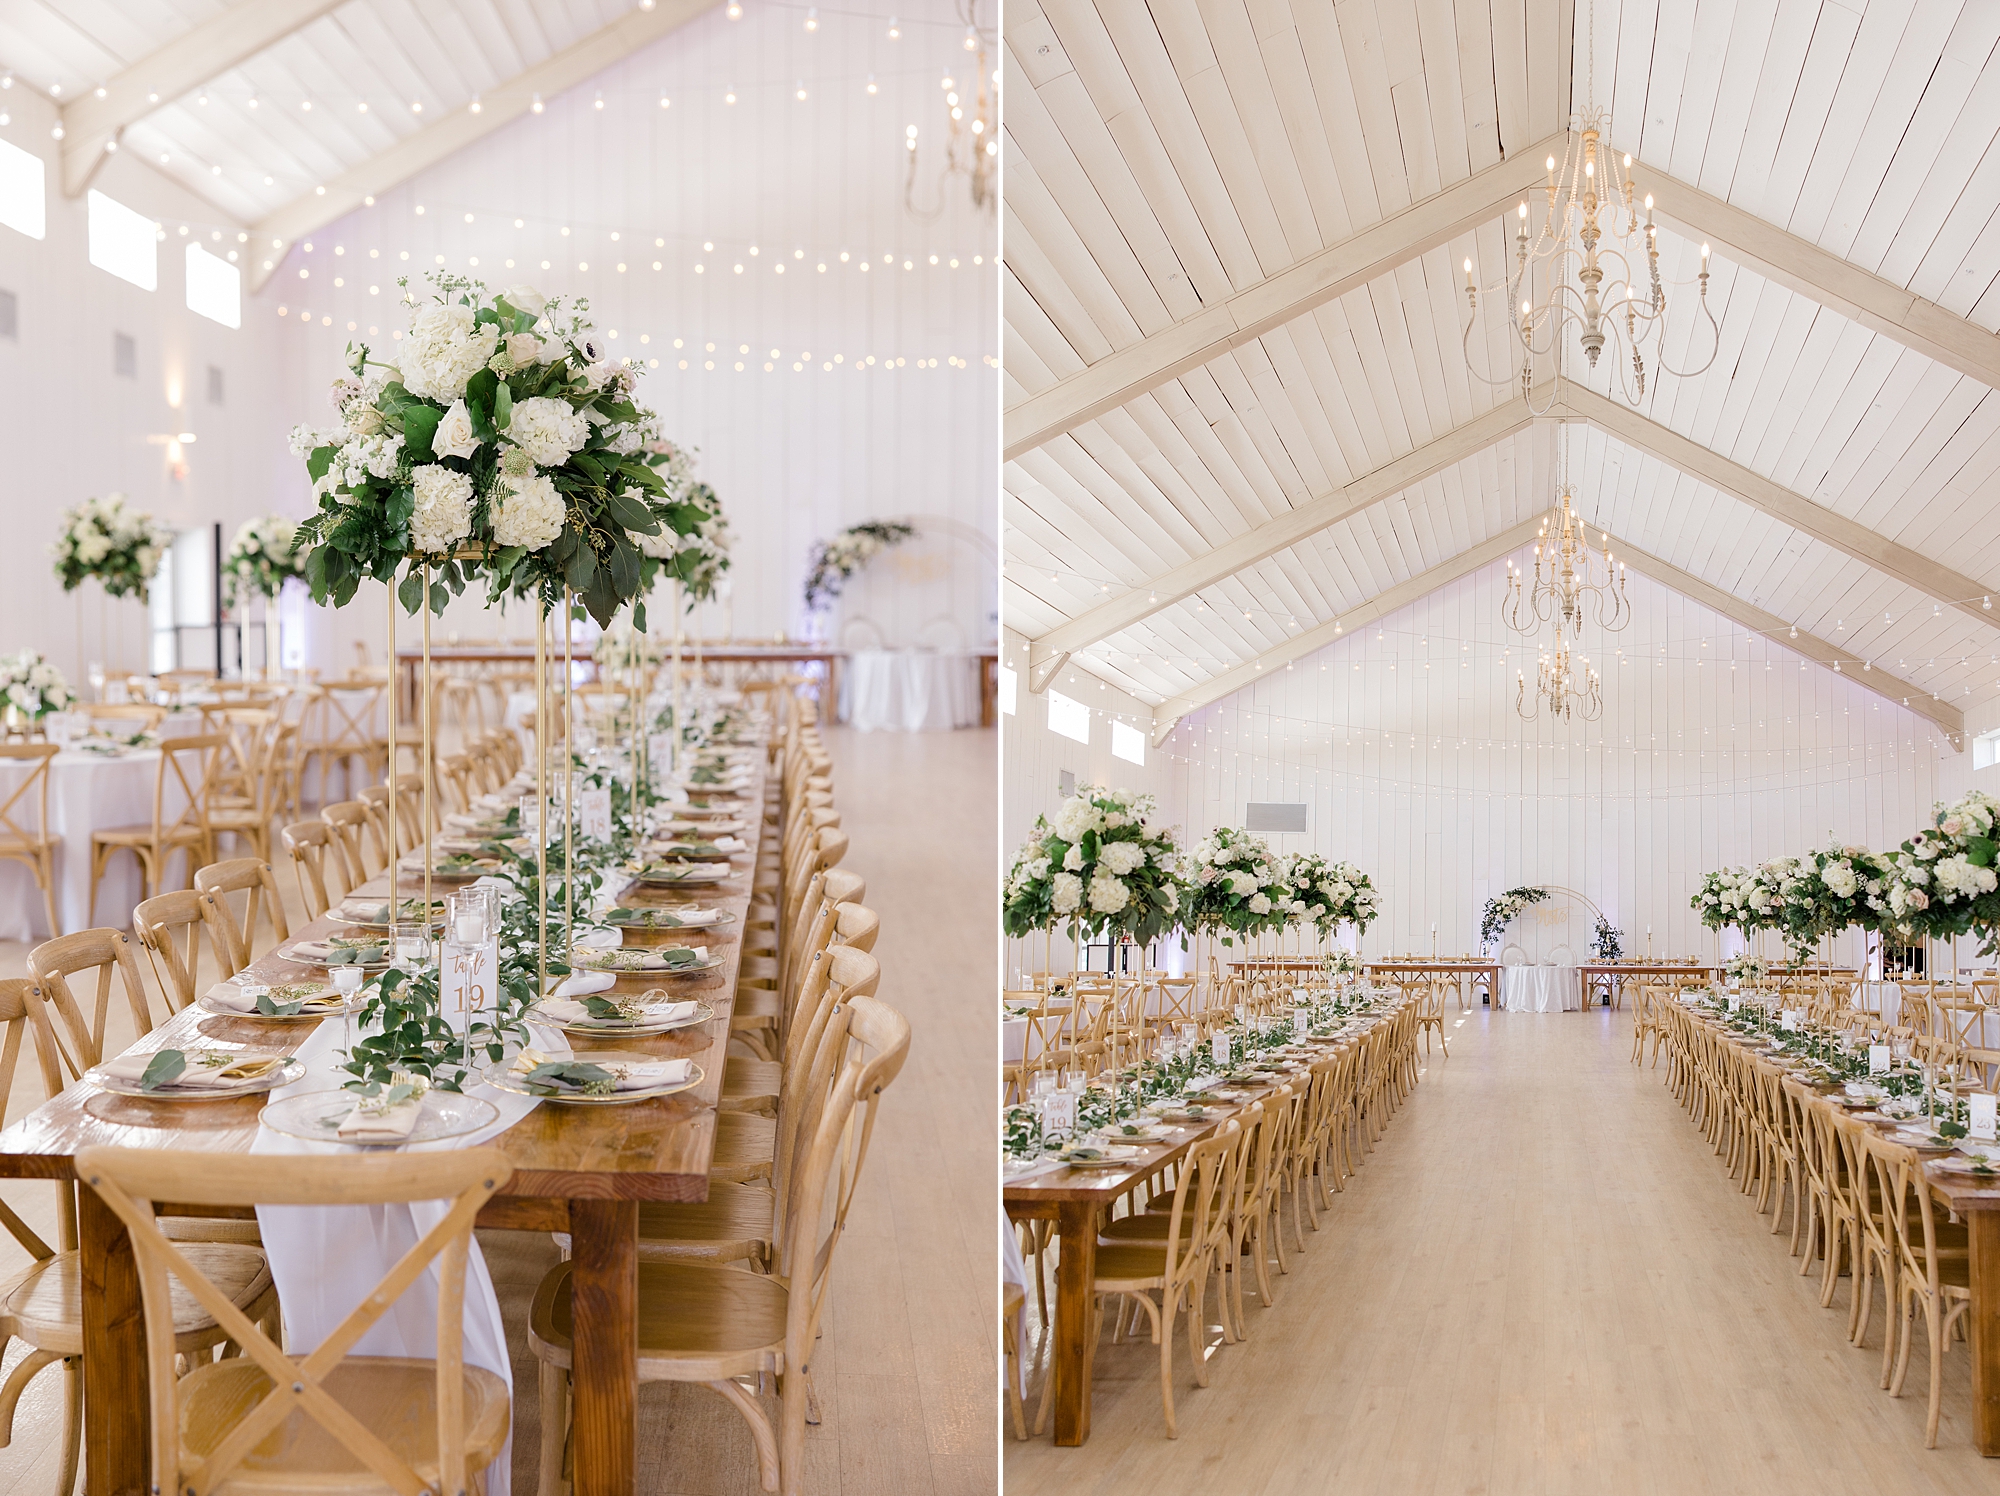 The Grand Ivory wedding reception with wooden chairs and white and green centerpieces 